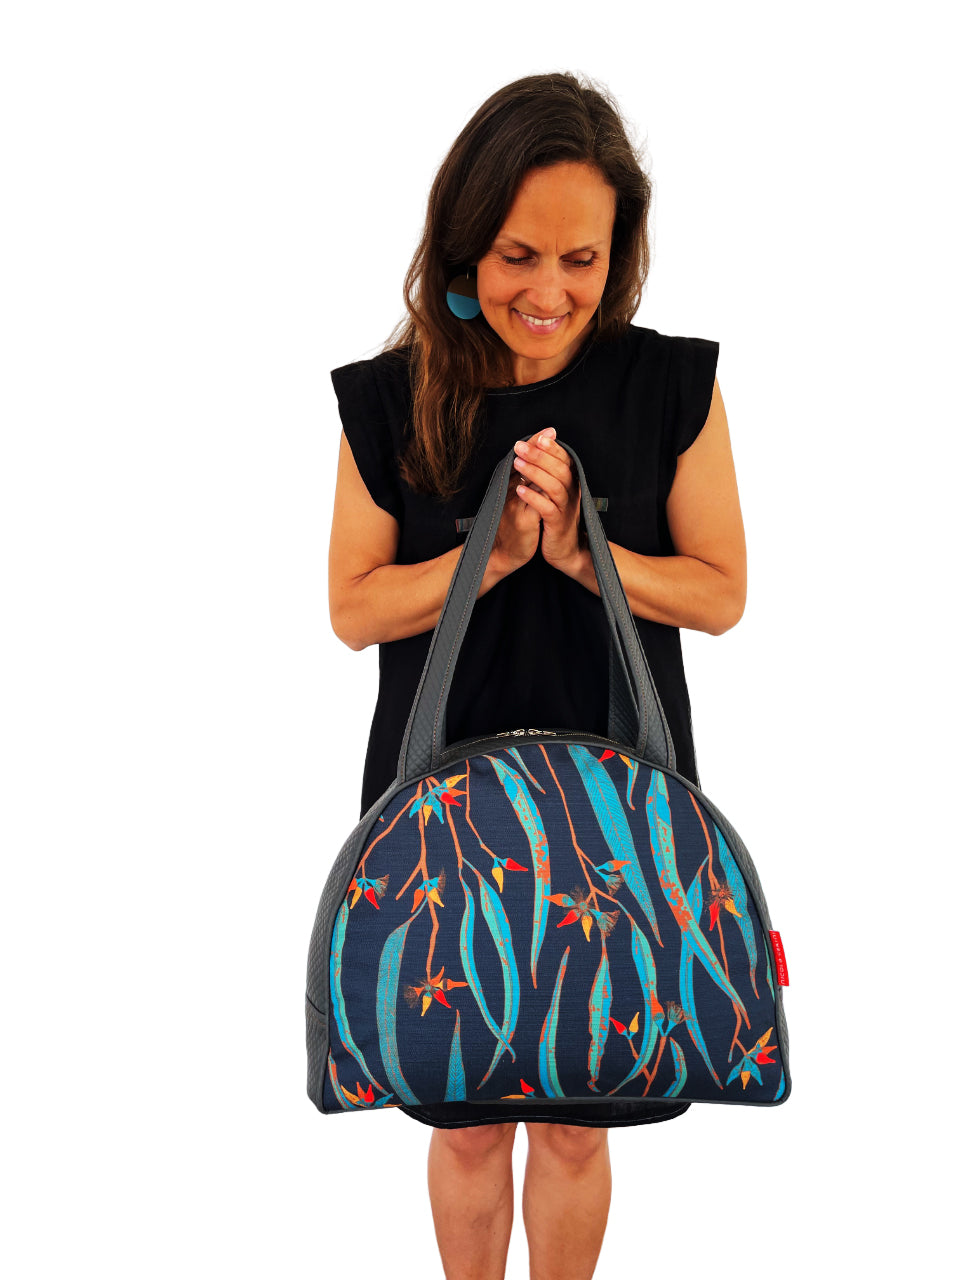 River Red Gum Overnight Bag- Limited Edition TWO LEFT!